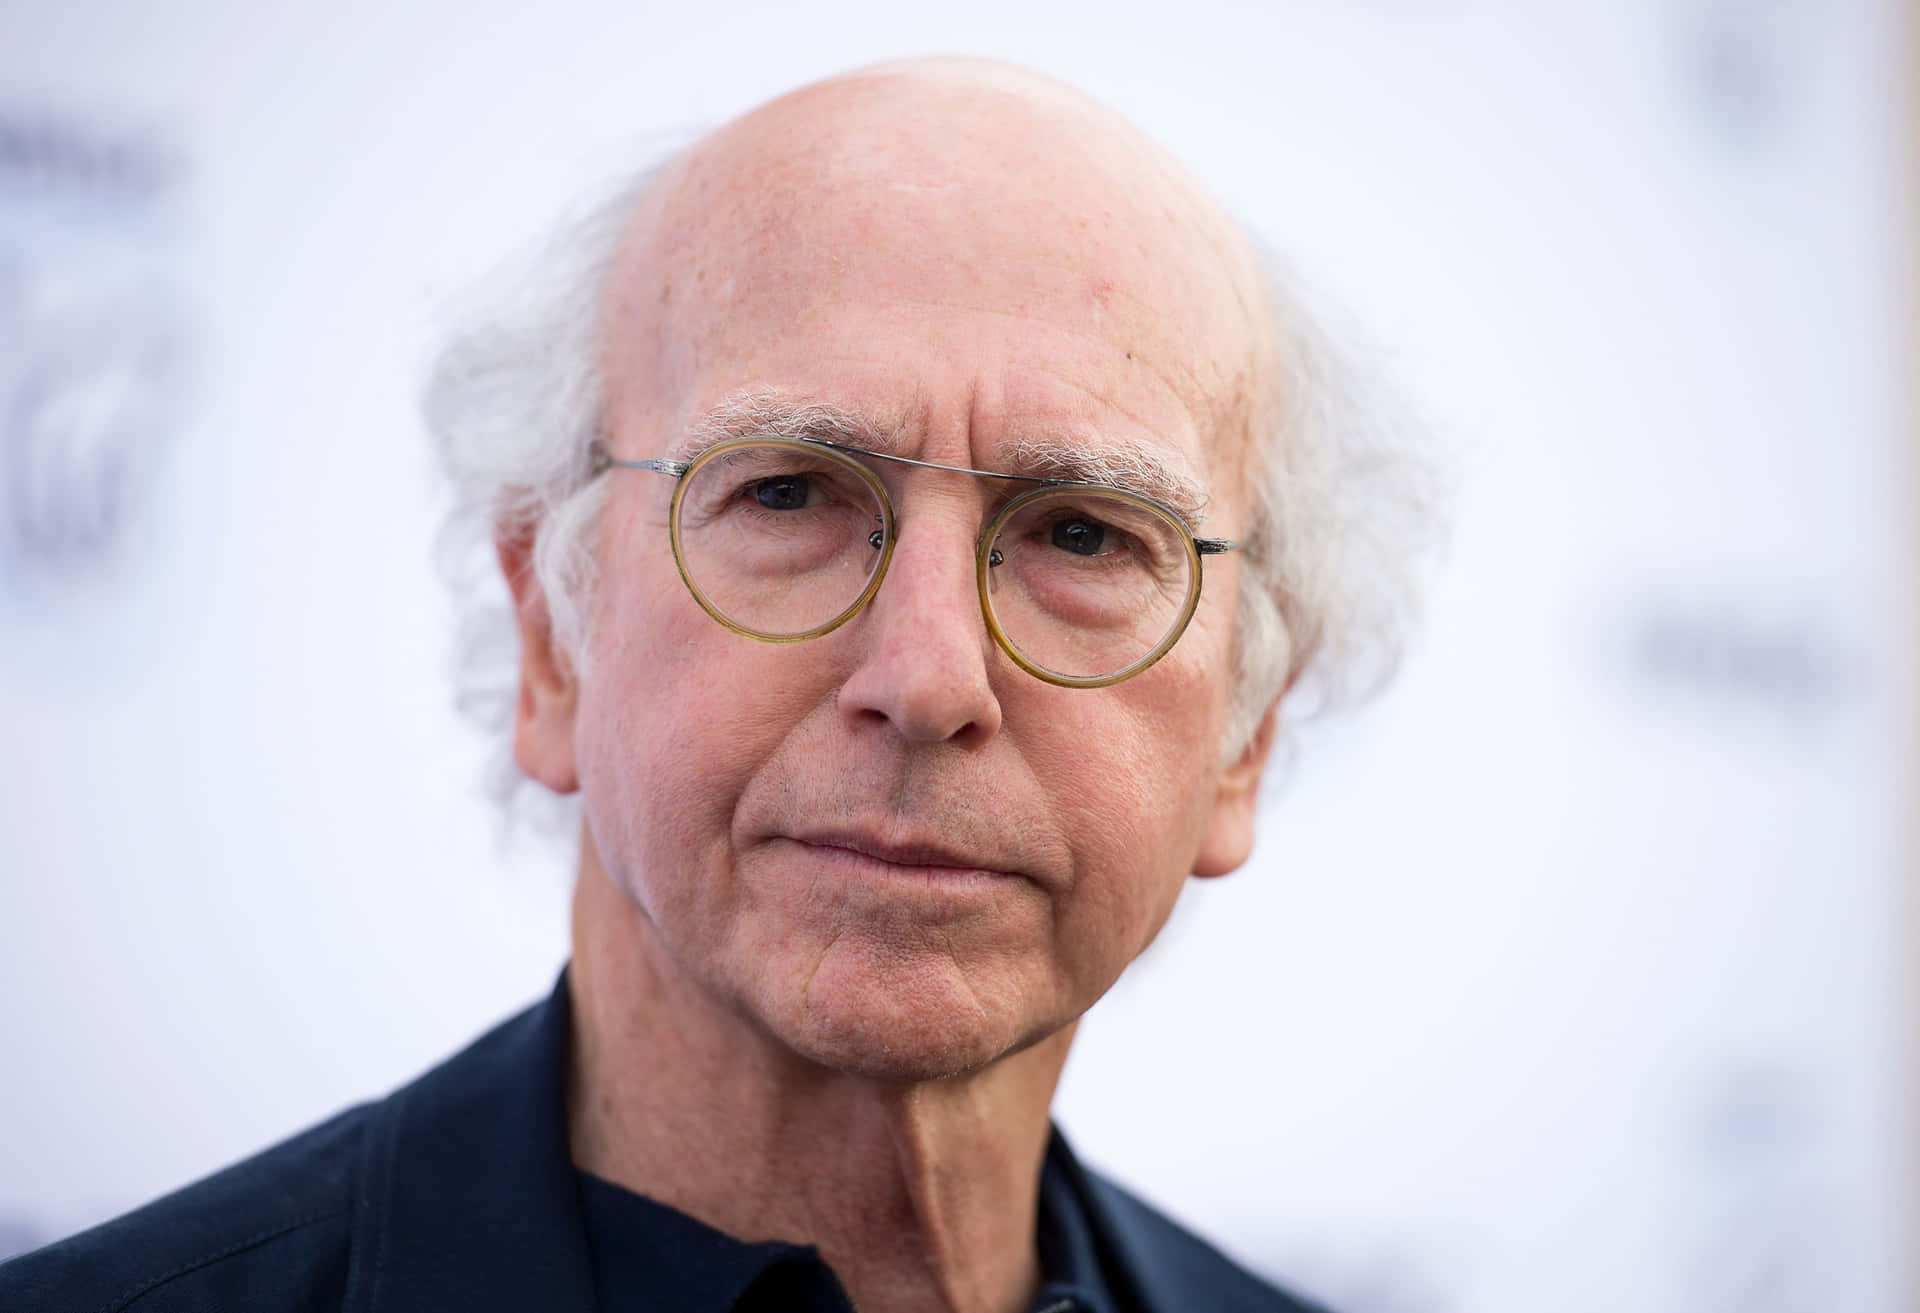 Larry David in a classic "Curb Your Enthusiasm" pose Wallpaper